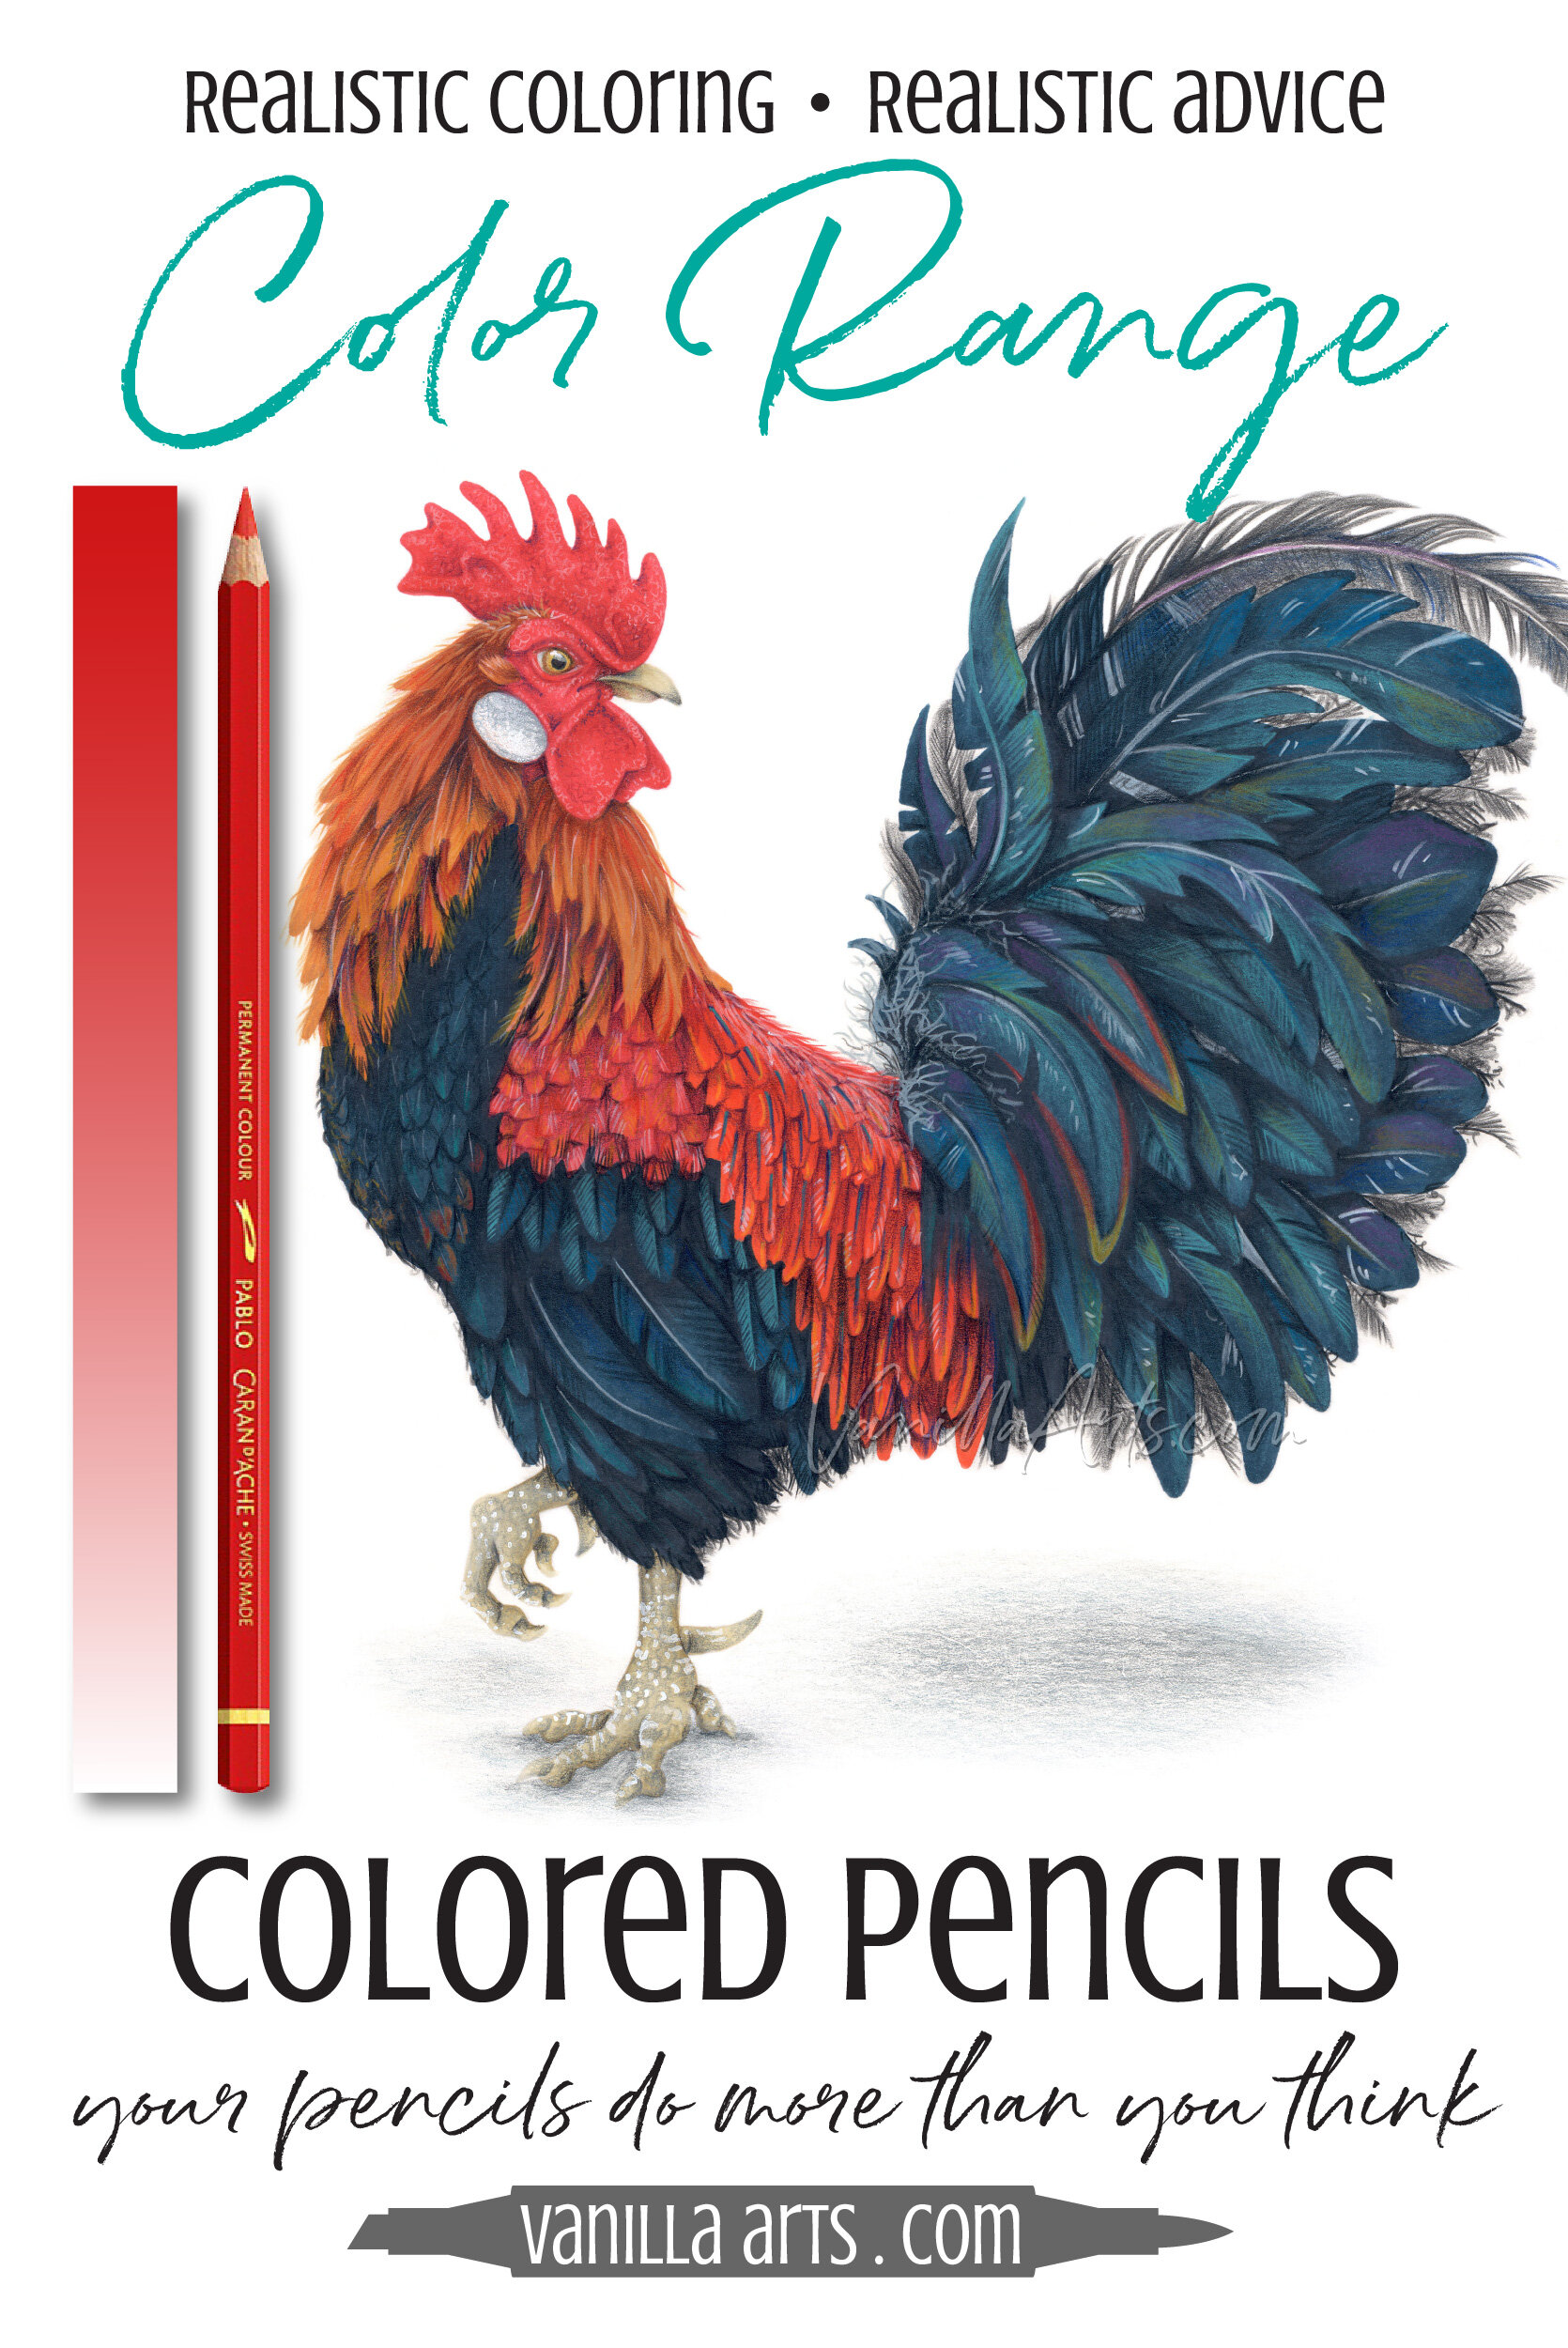 How to Get the Most Possible Use Out of Every Colored Pencil 